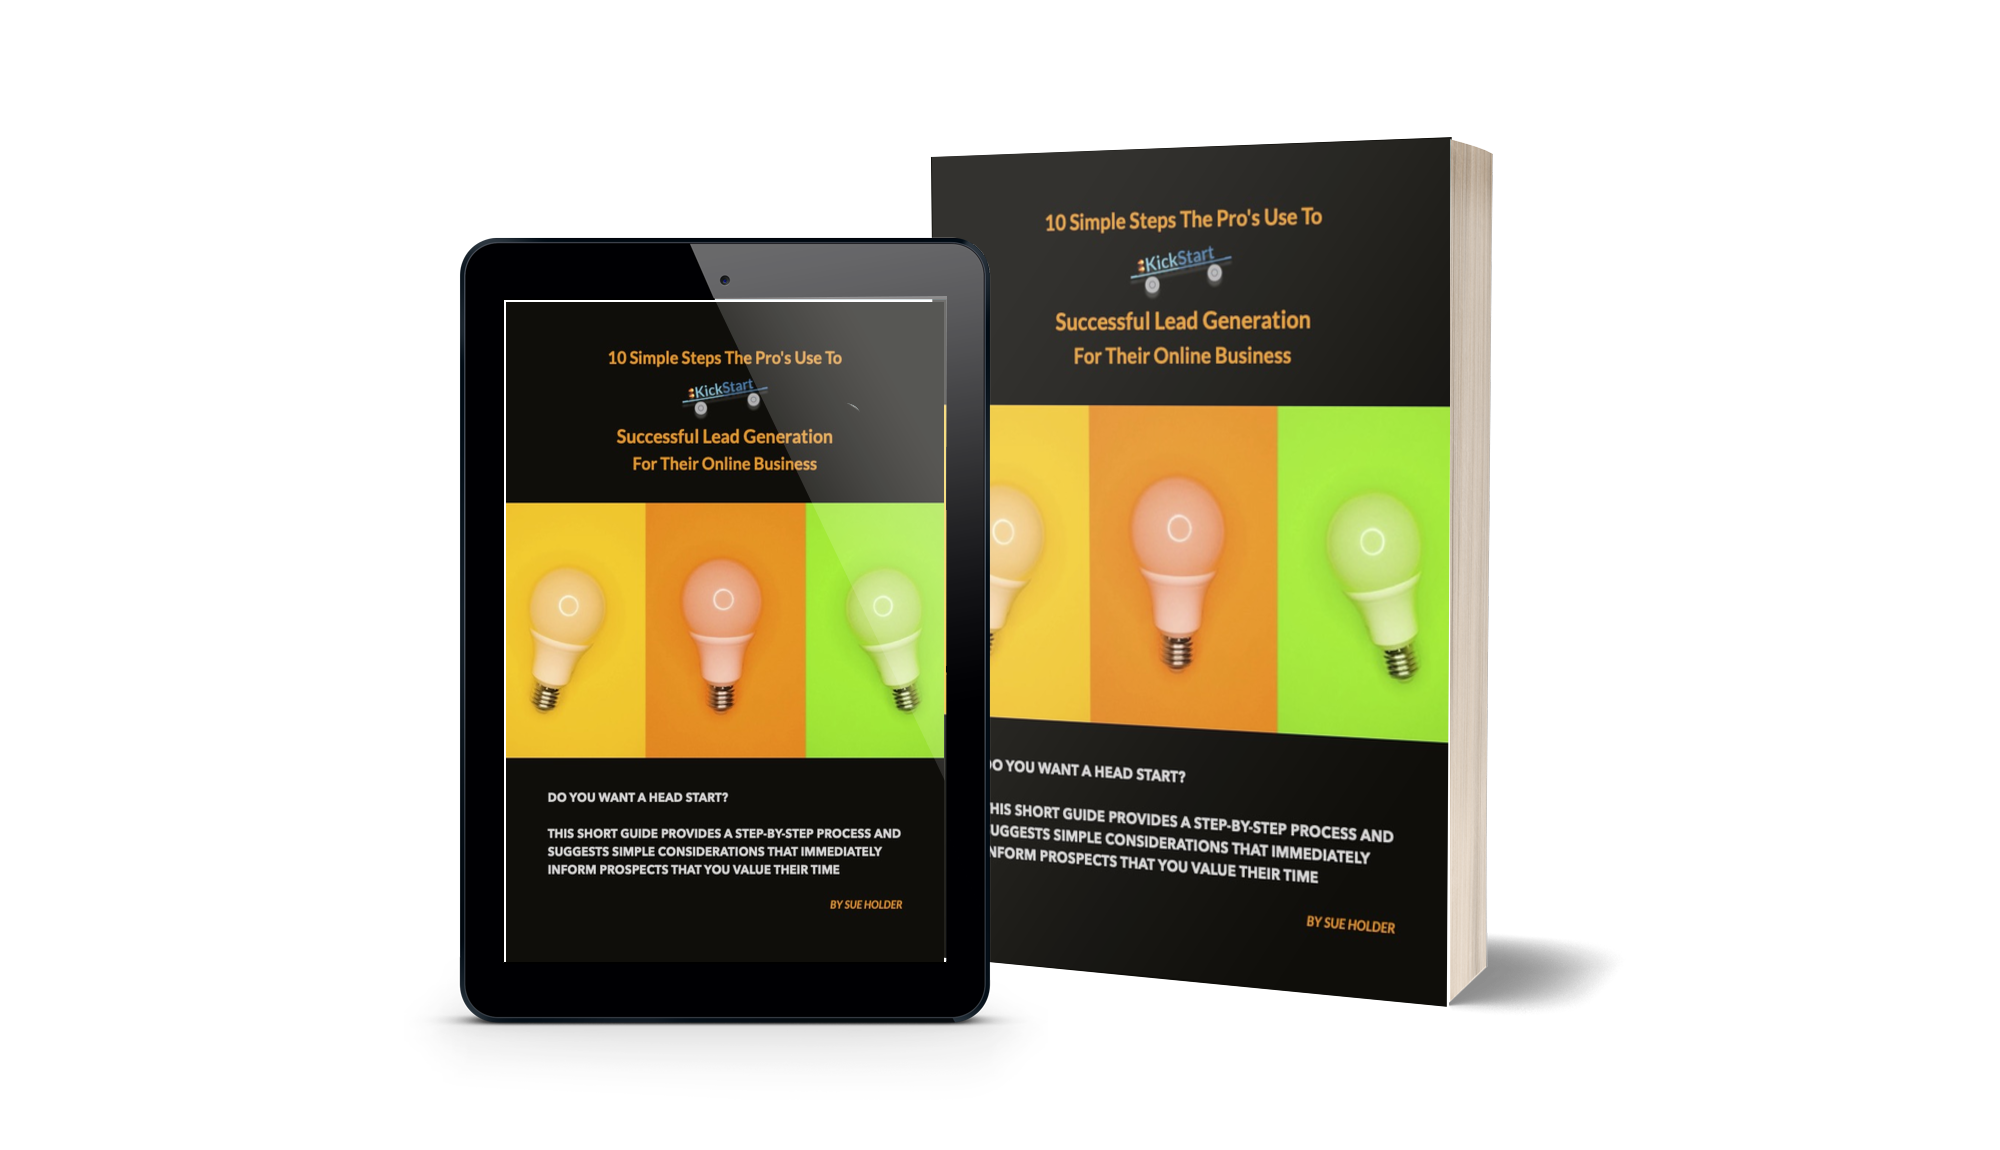 10 Simple Steps The Pro's Use To KickStart Lead Generation For Their Online Business eBook